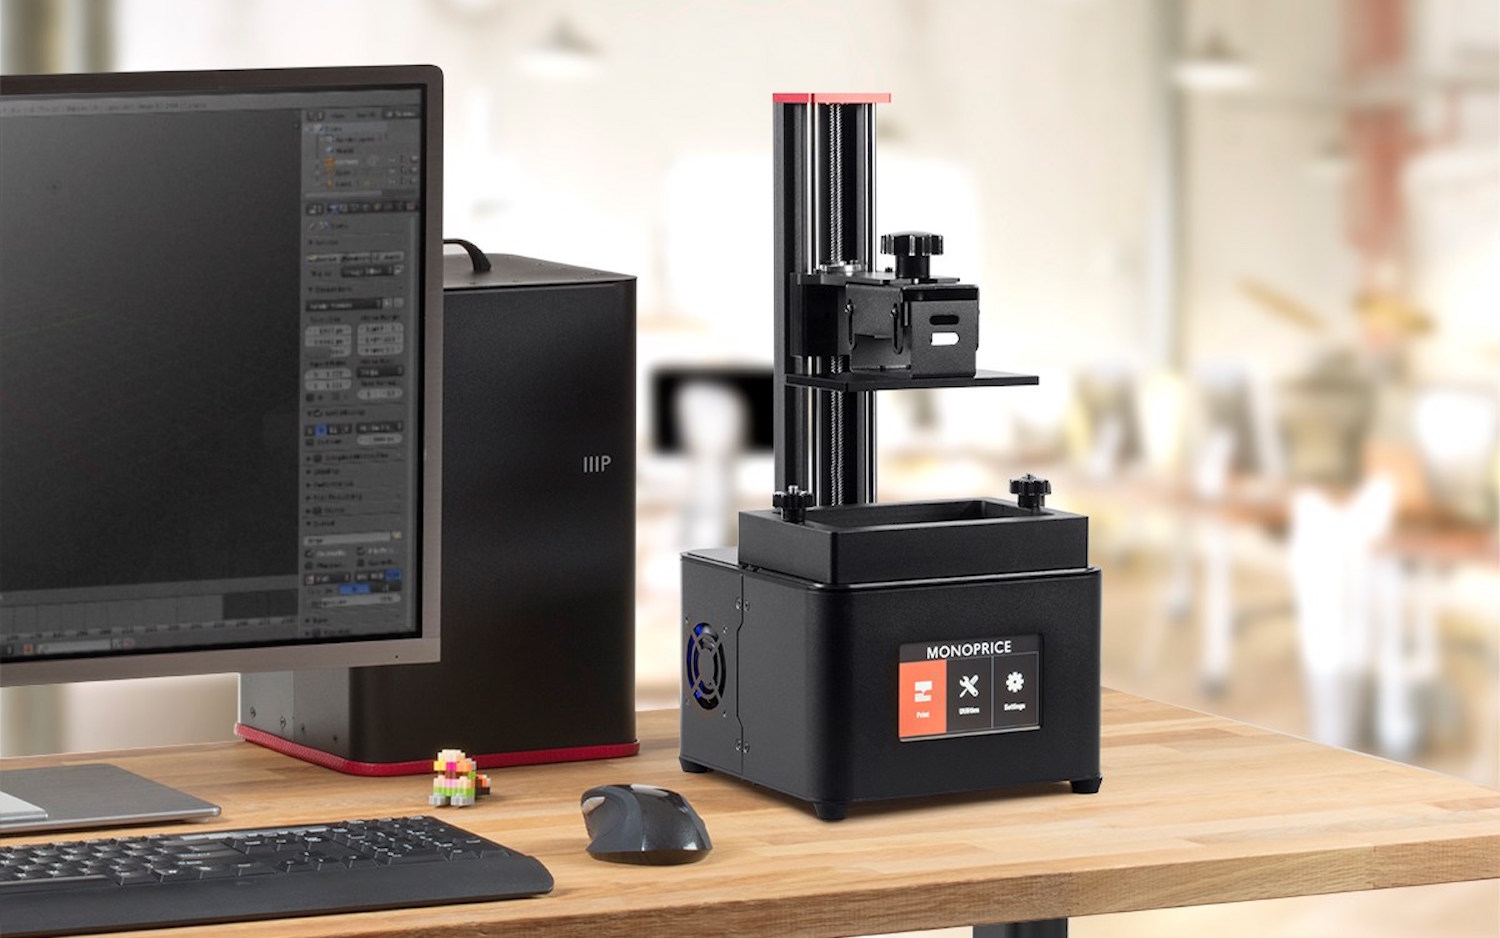 monoprice-mp-mini-deluxe-3d-printer-full-review-and-benchmarks-tom